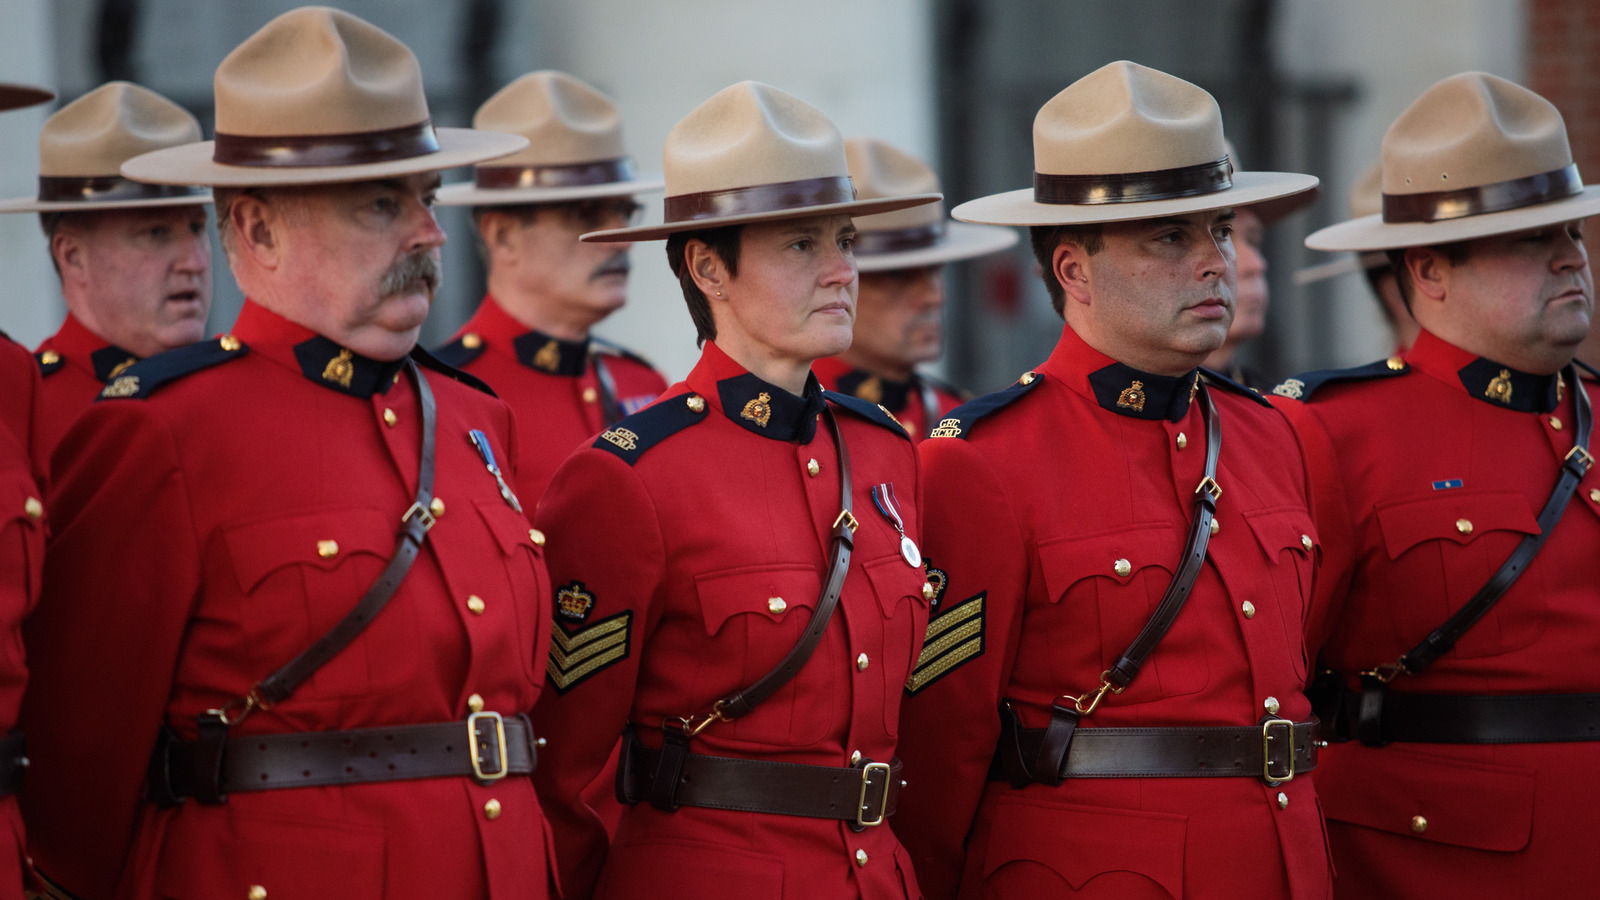 Traditional Canadian Clothing Police